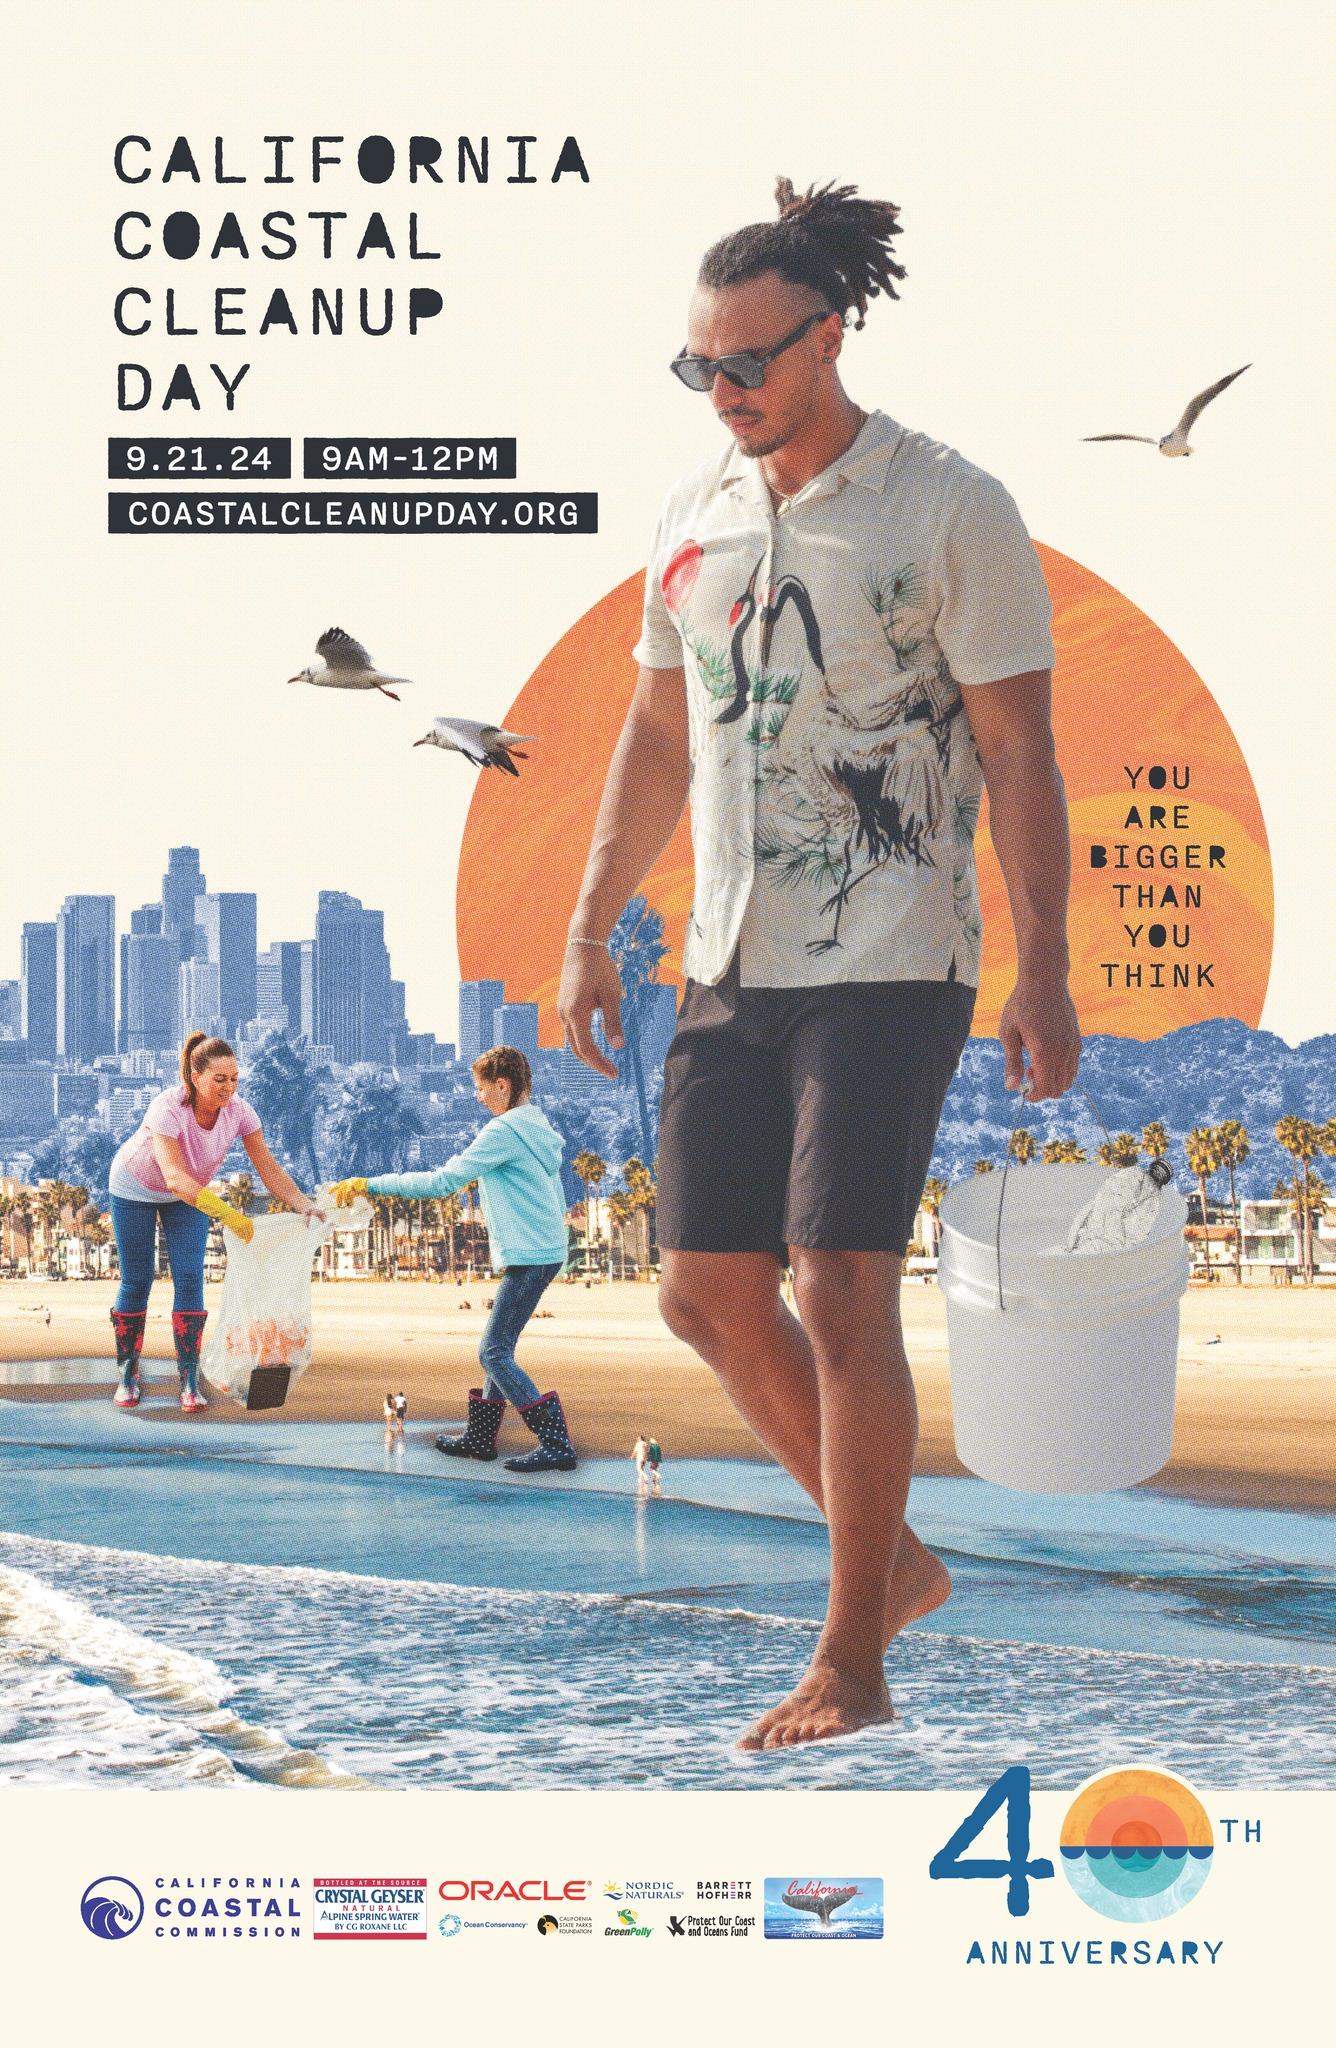 California Coastal Cleanup Day poster image. Shows 'giant' people picking up trash on the beach, with city of Los Angeles in distance.